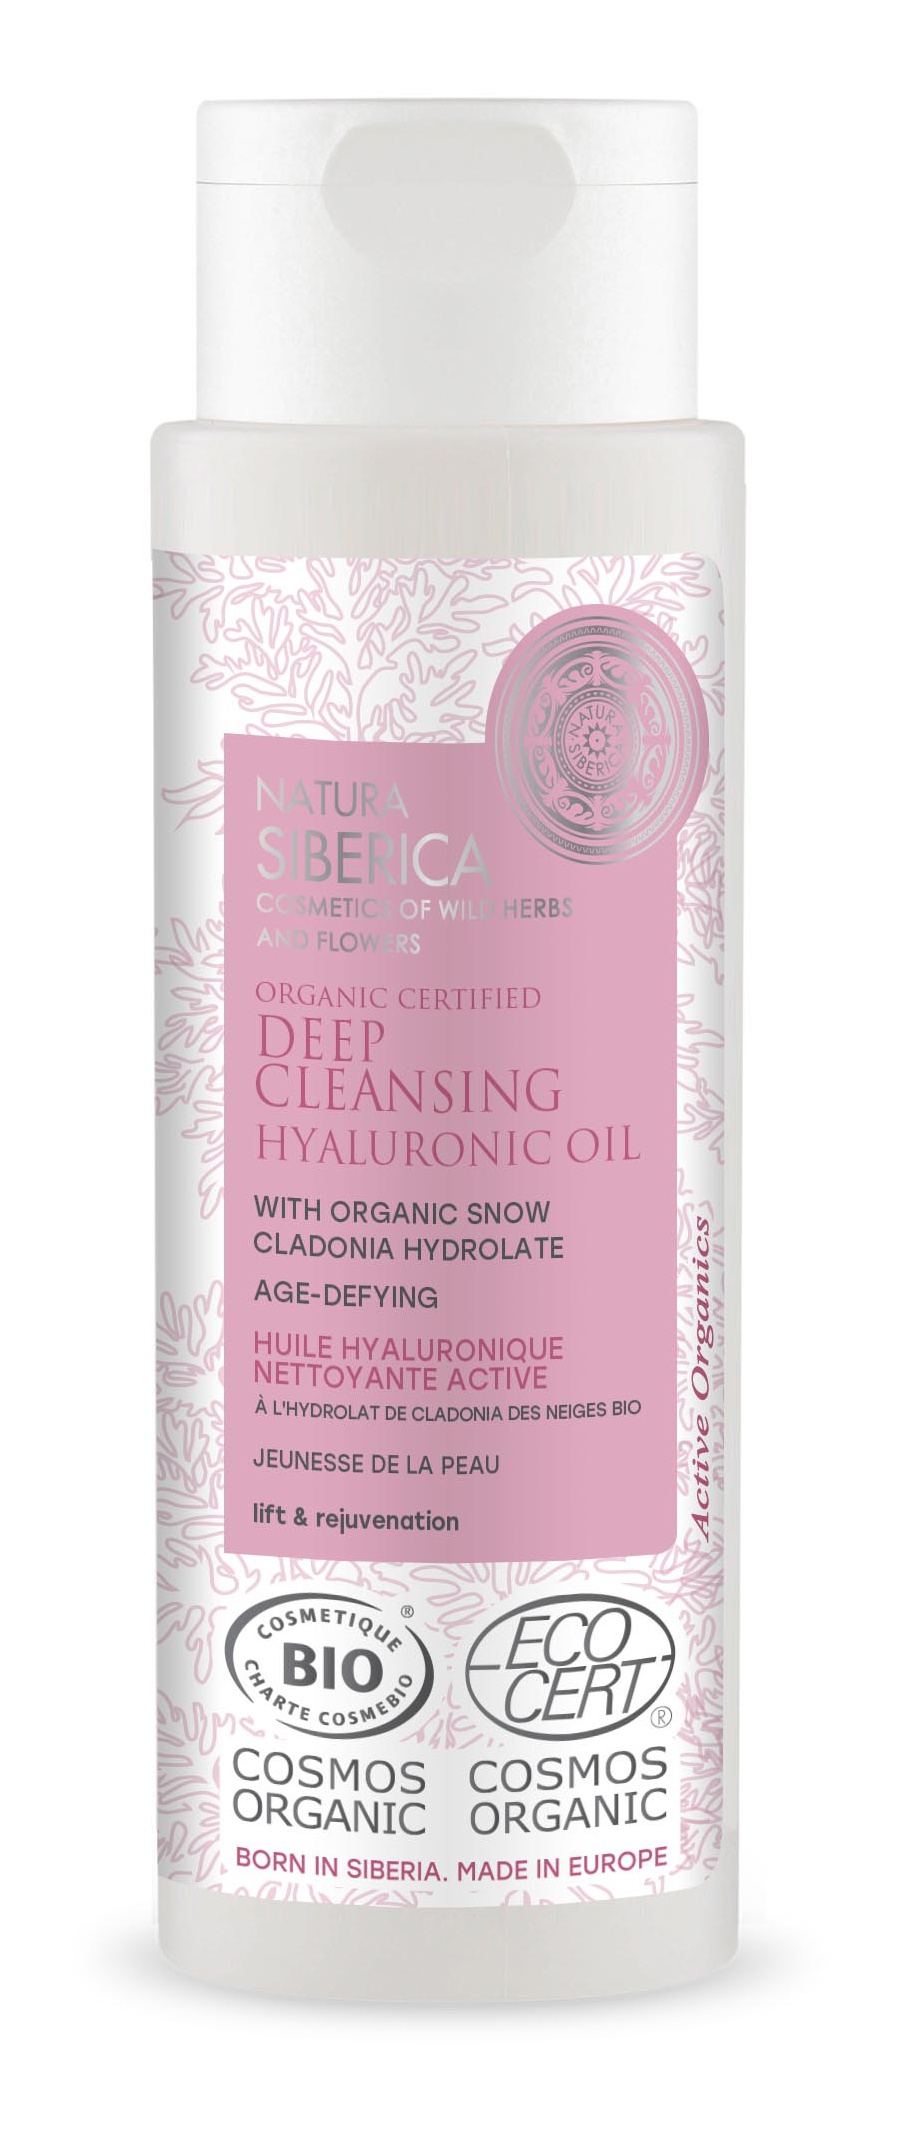 Natura Siberica Organic Certified Age-Defying Deep Cleansing Hyaluronic Oil